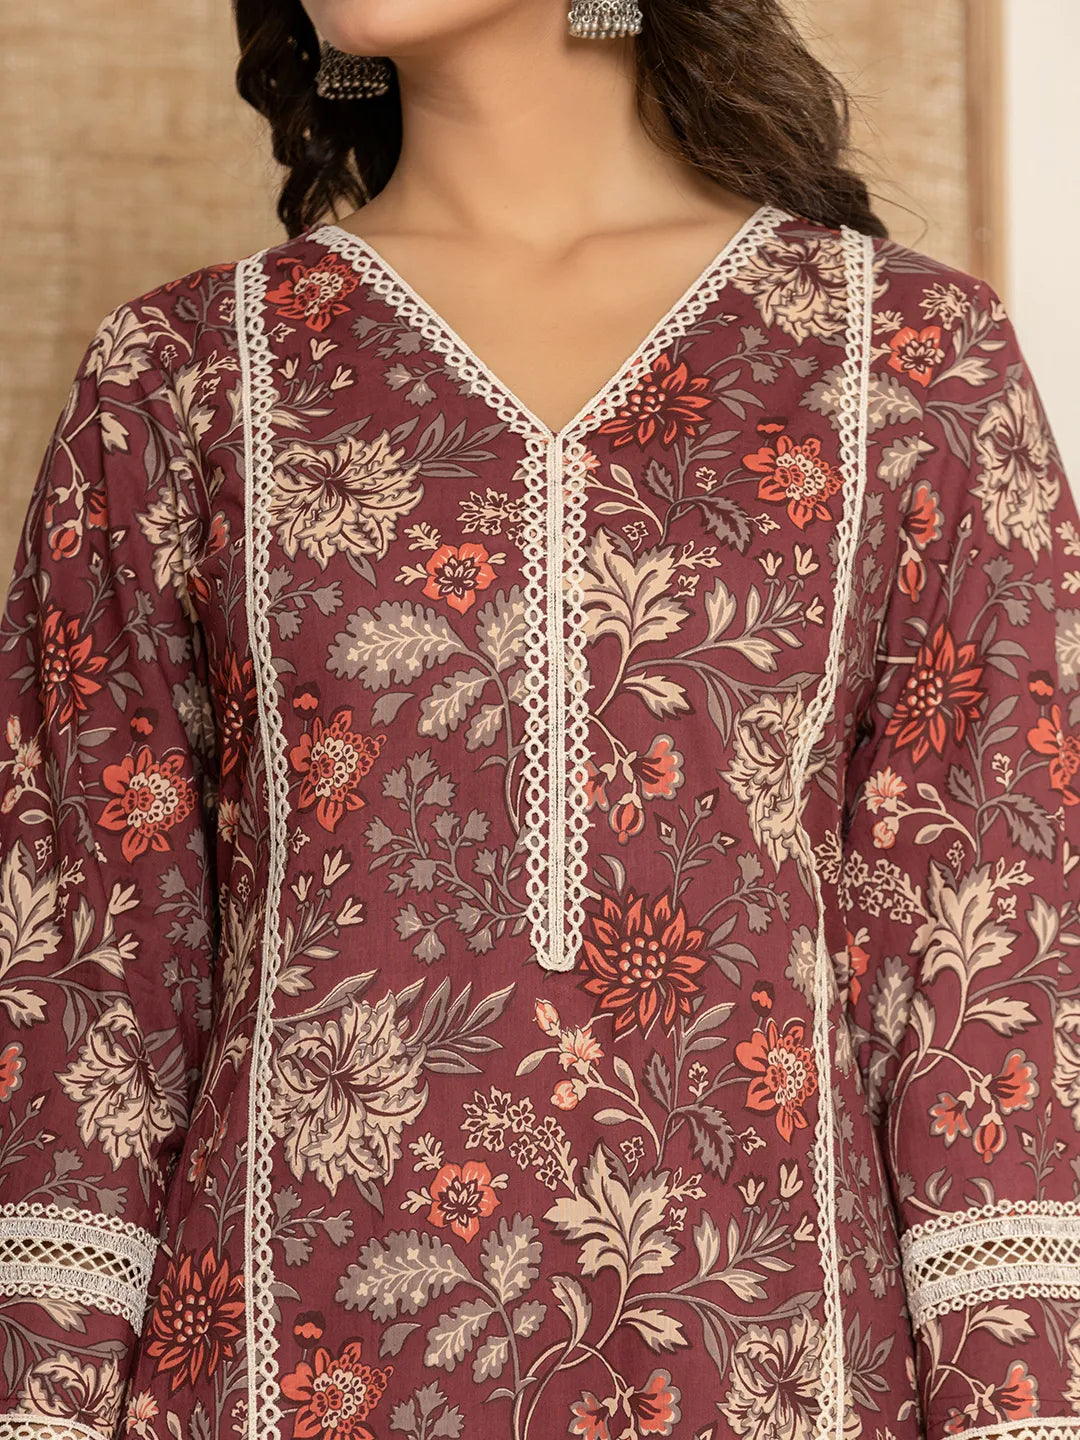 Maroon Floral Print Cotton Straight Style Kurta And Trouser With Dupatta